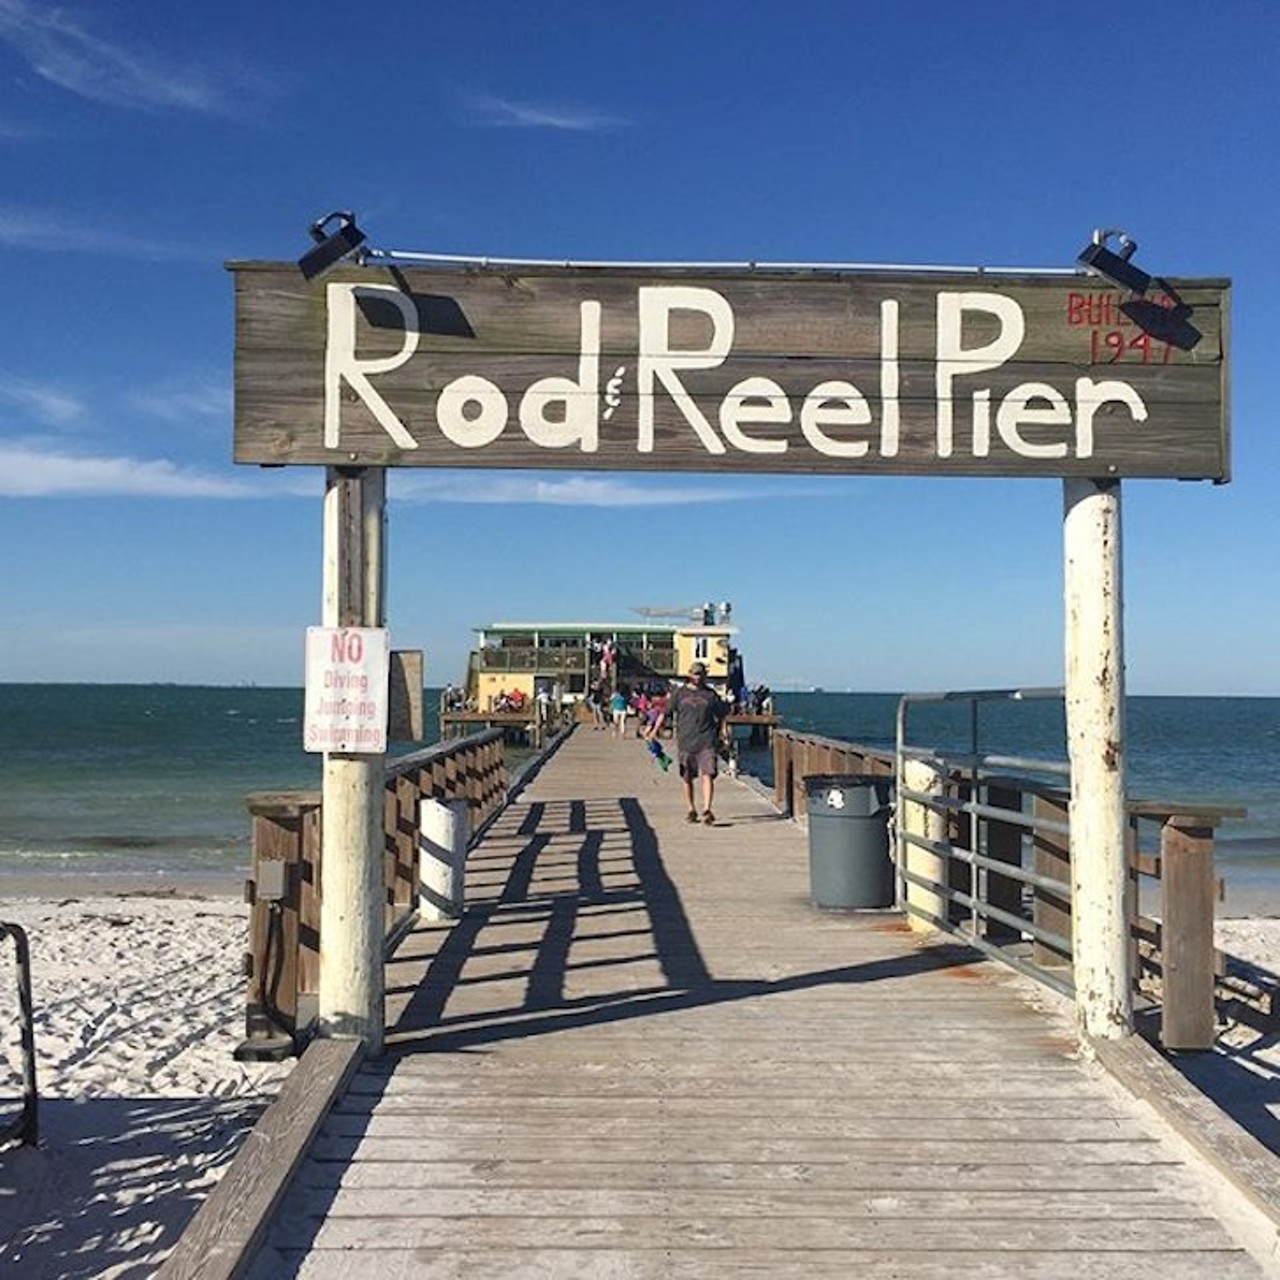 ANNA MARIA ISLAND
It's time to relax on Anna Maria Island. This 8-mile barrier island on the Florida West Coast offers plenty of activities like kayaking and canoeing, fishing and paddleboarding. Also, don&#146;t miss out on the Rod & Reel Pier for some of the best coconut shrimp of your life.
Distance: 2 hours and 32 minutes
Photo via bbrand123/Instagram